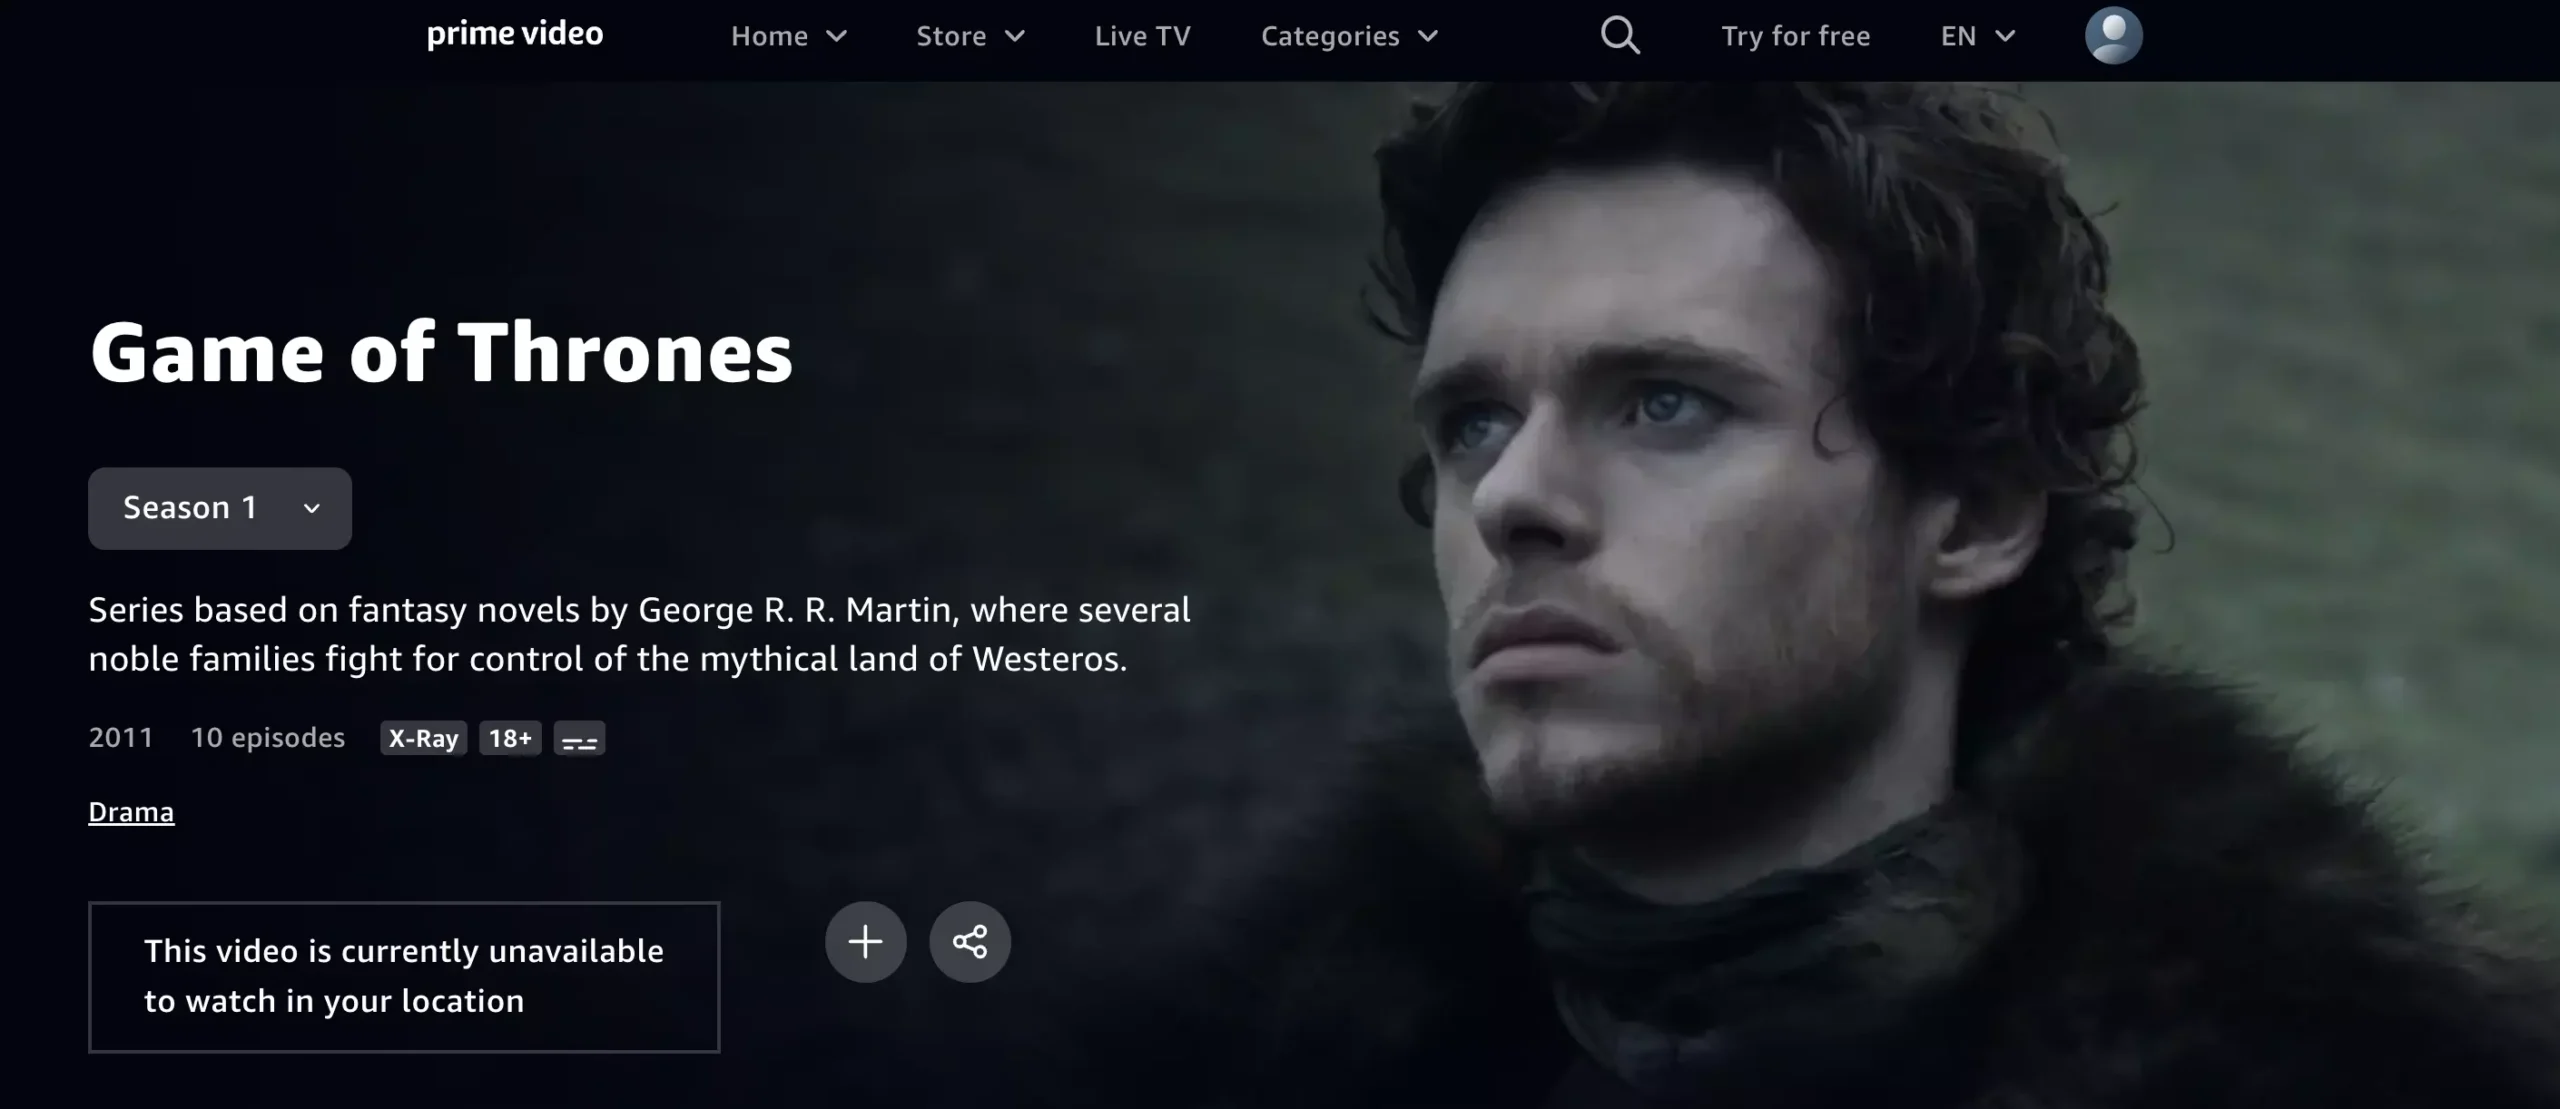 Is Game of Thrones on Netflix? How to watch and stream the HBO series